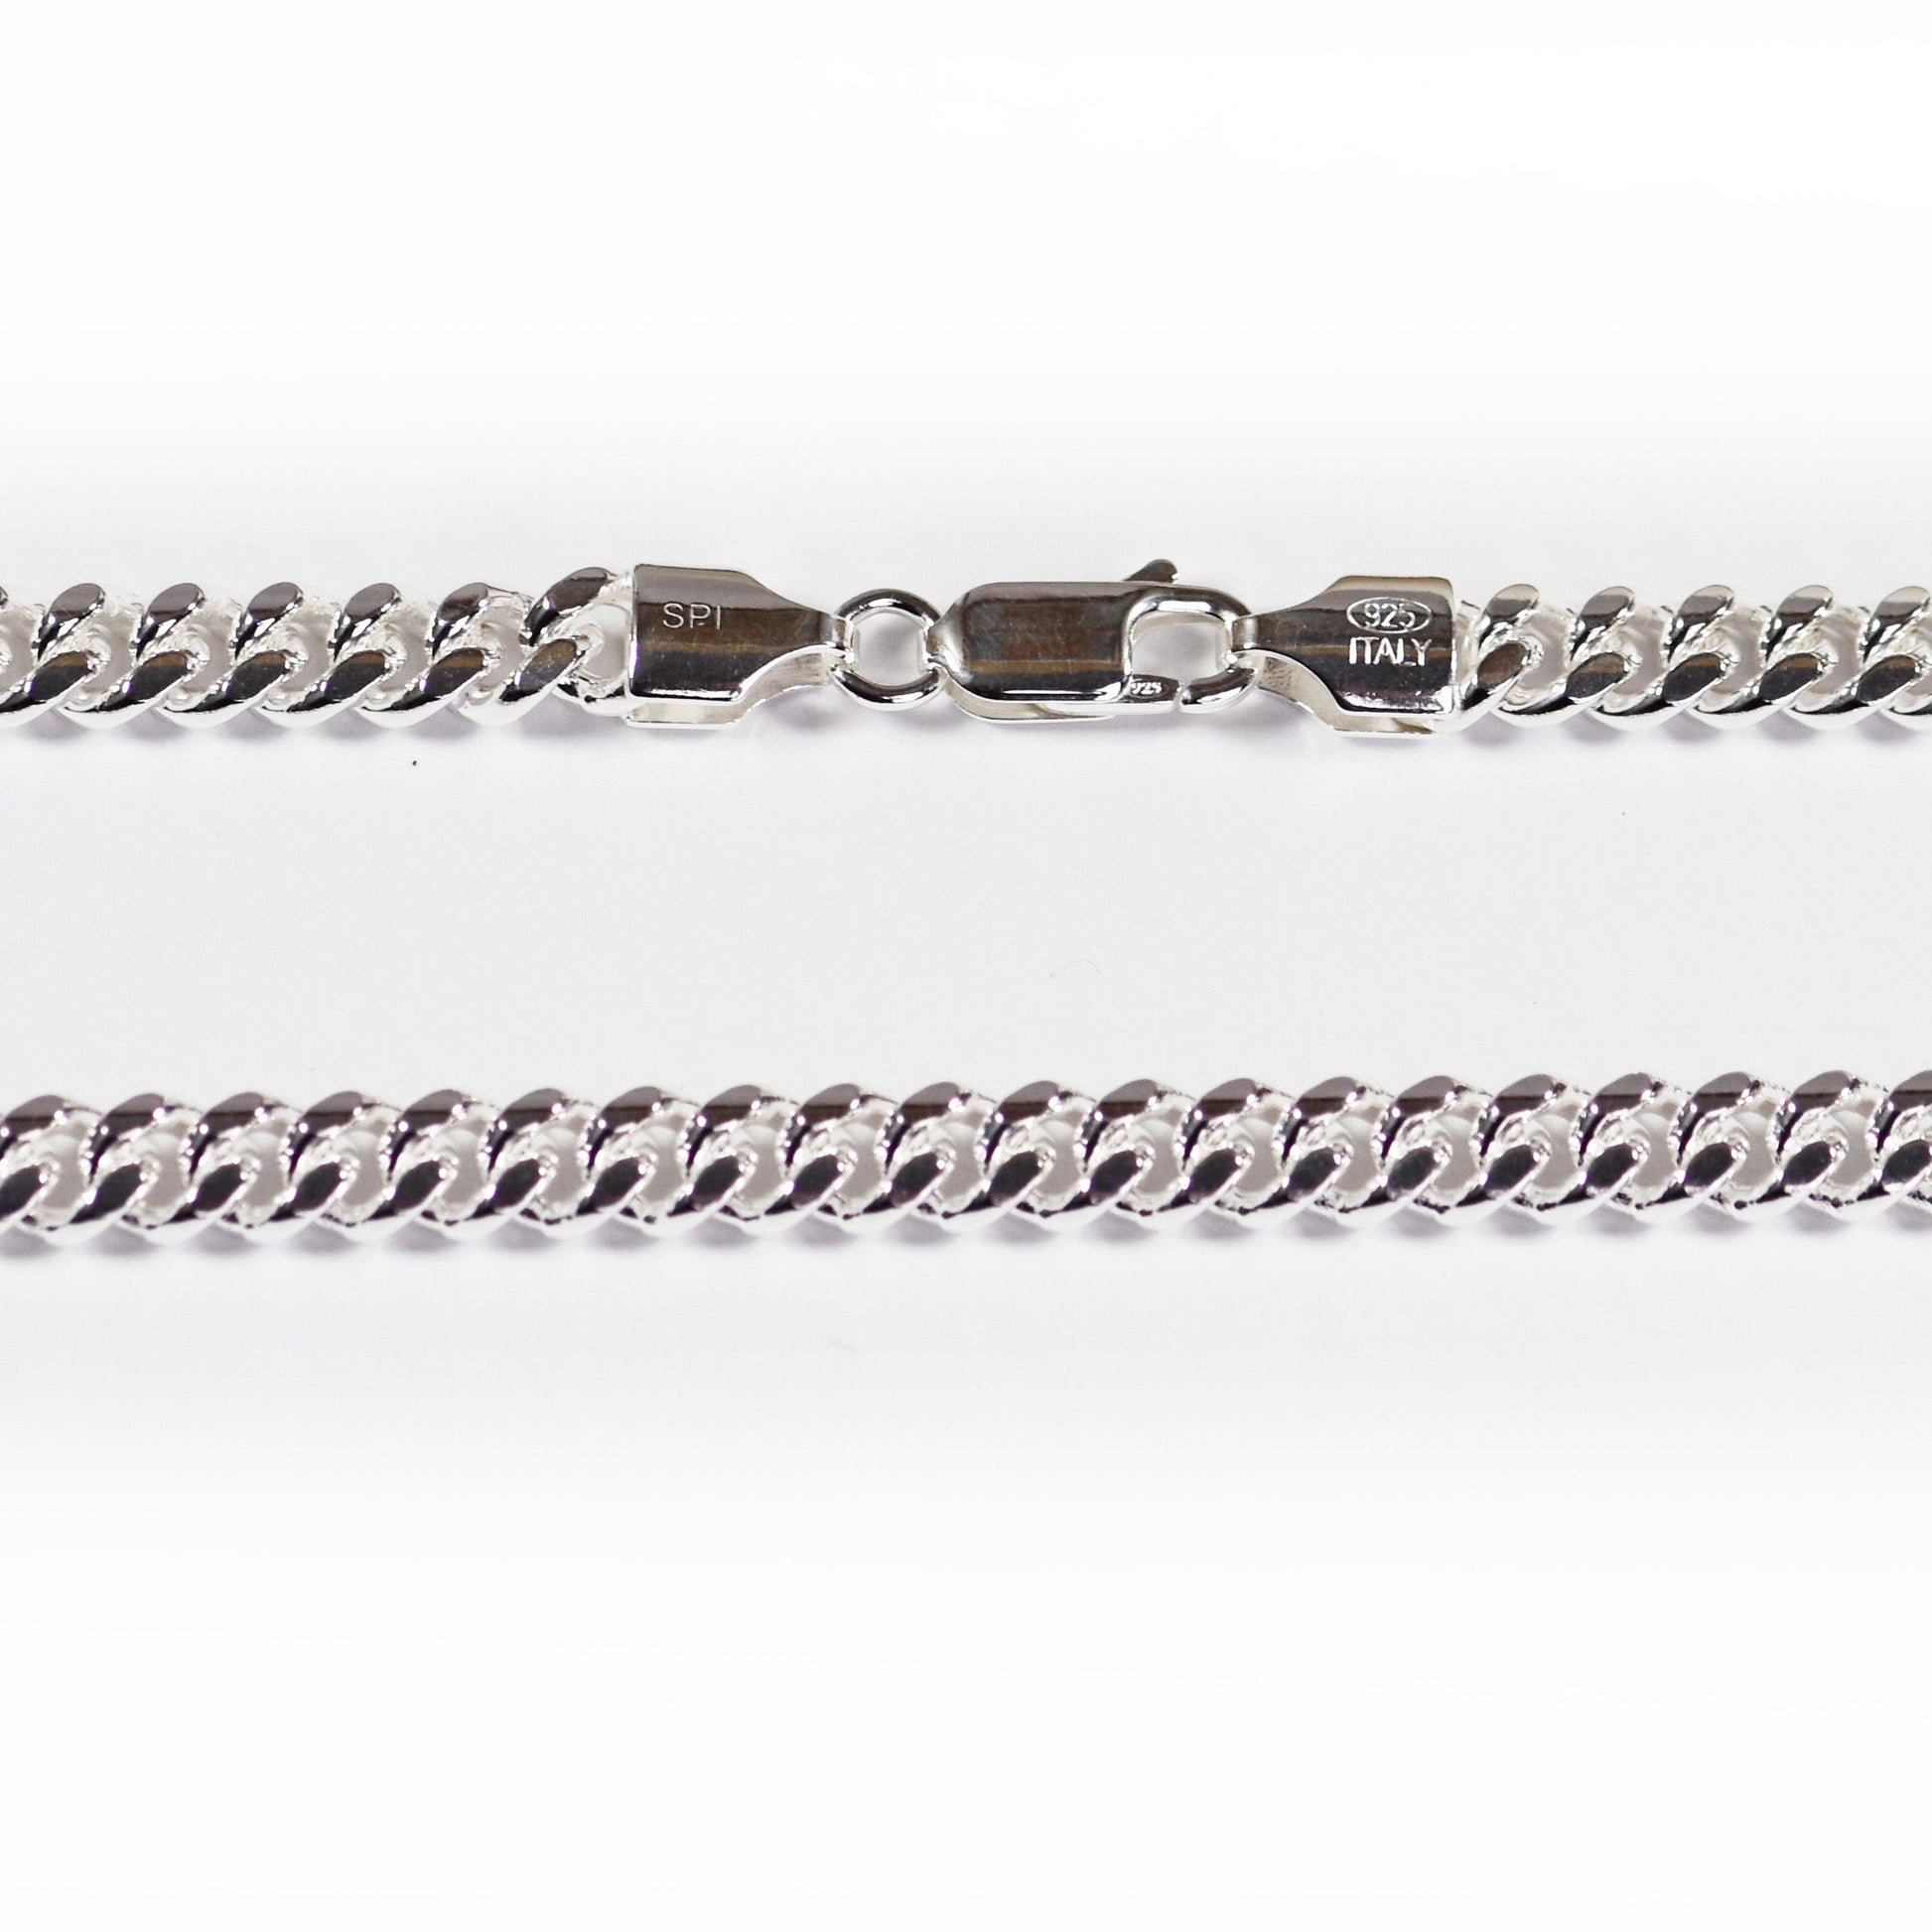 Miami Cuban Link Chain 4.9 mm - Sterling Silver